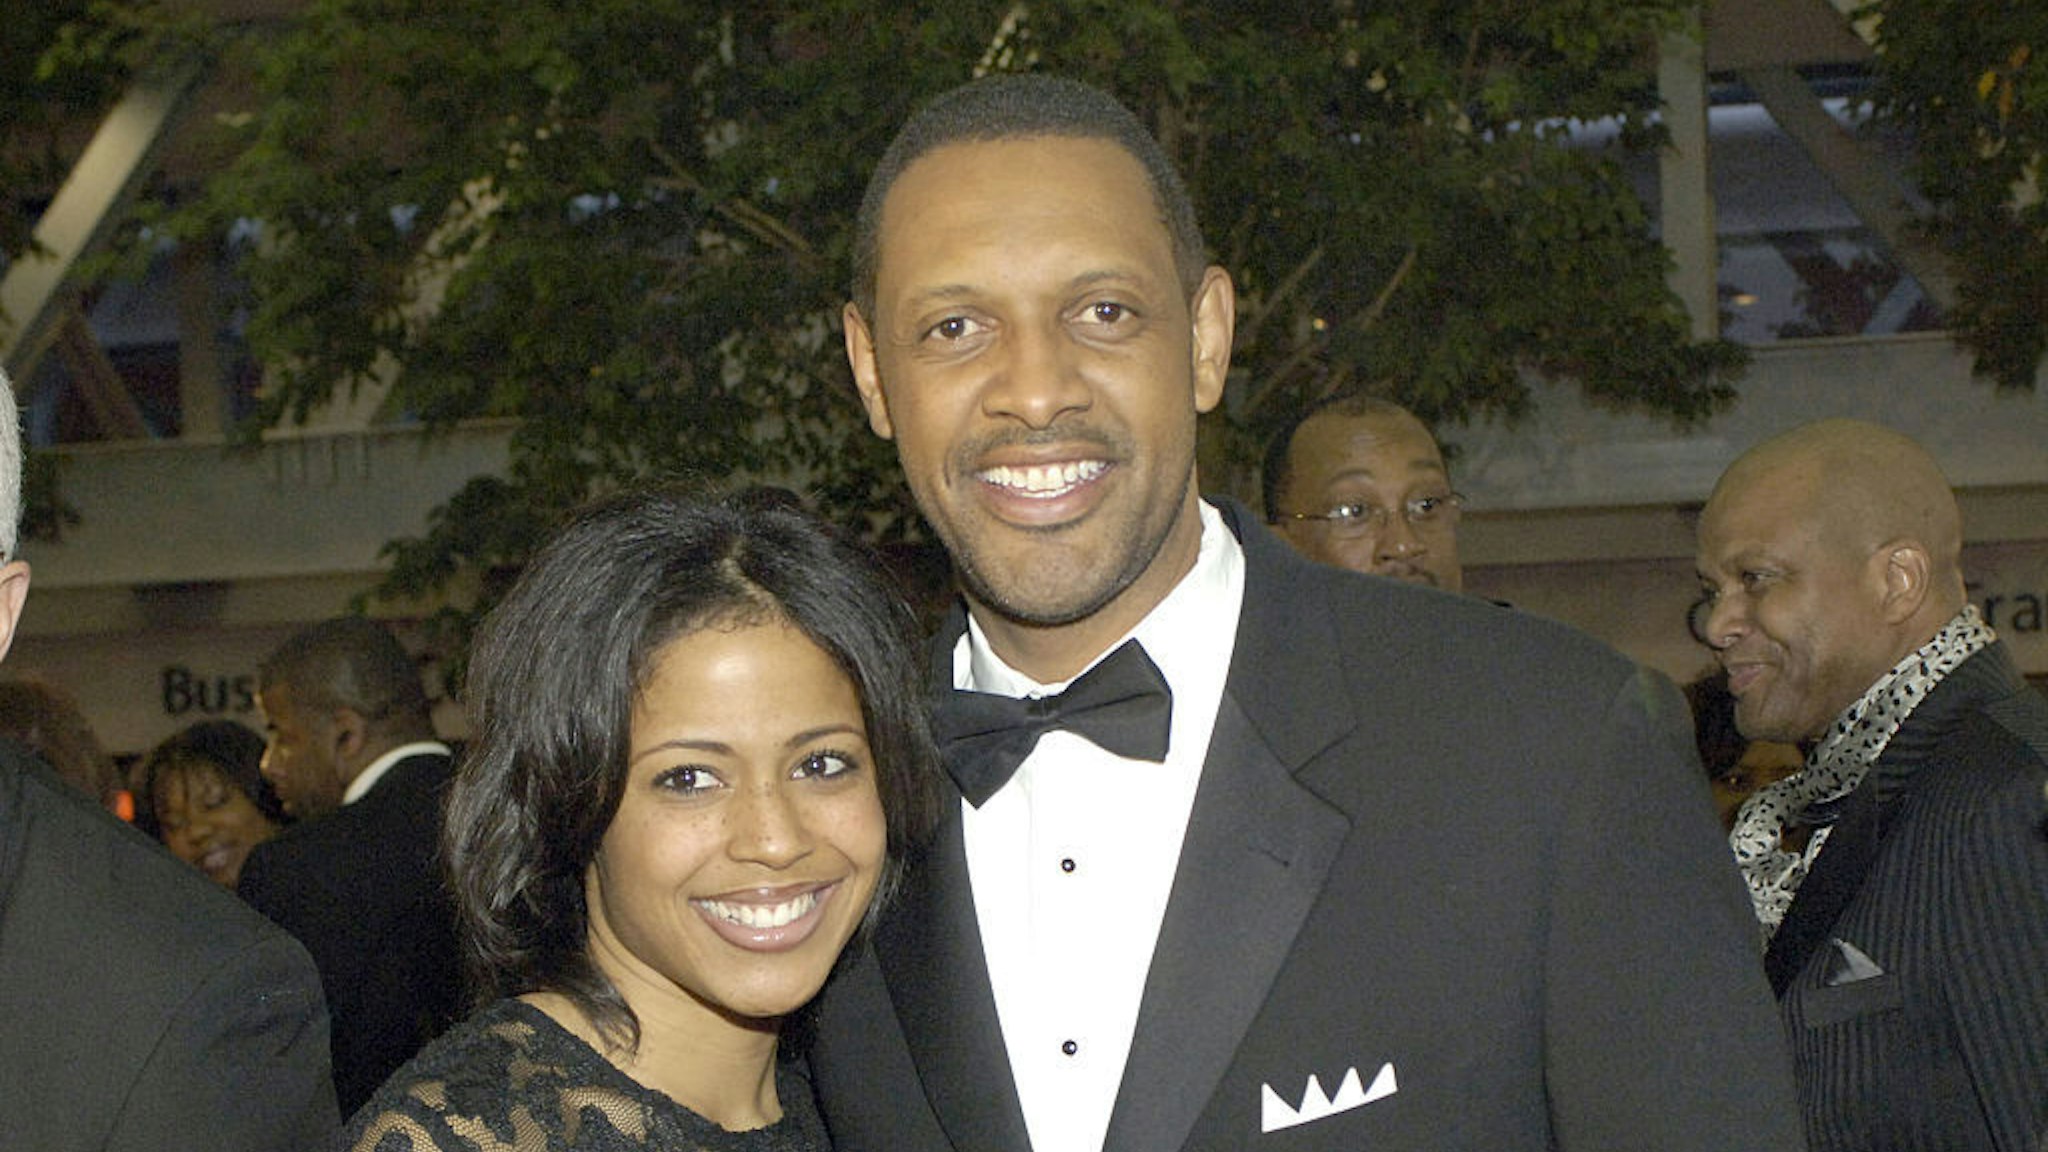 ernon Jones and wife during 2006 Trumpet Awards - Arrivals at Georgia World Congress Center in Atlanta, Georgia, United States. (Photo by Frank Mullen/WireImage)